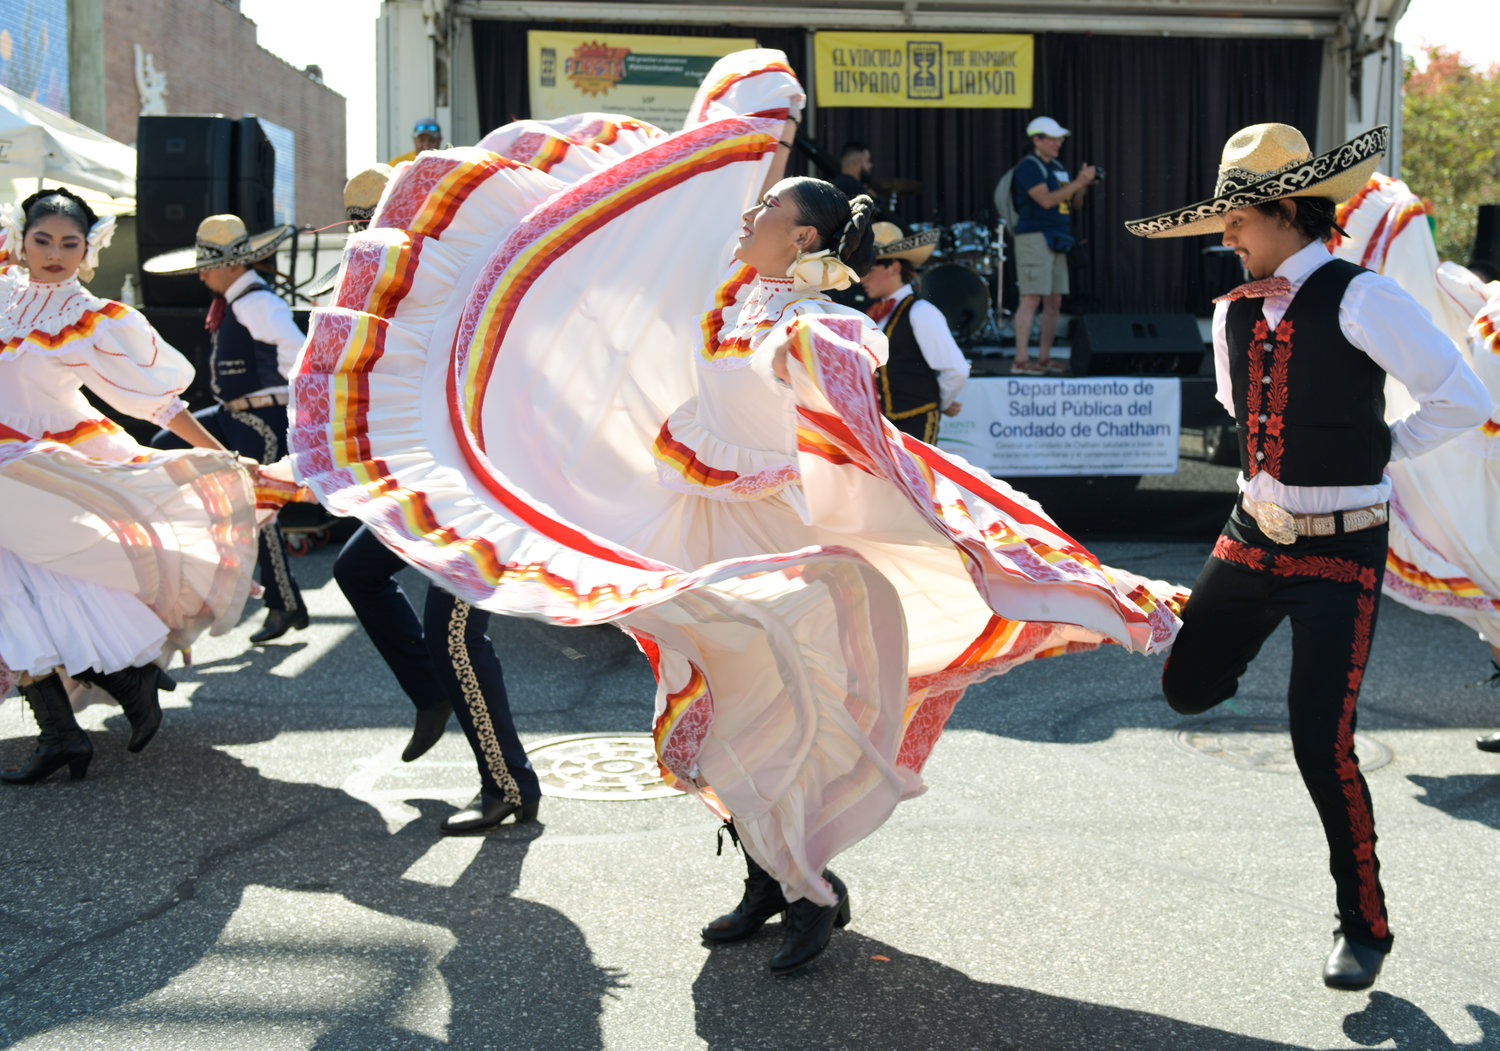 The Balet Folklorico in mid-dance at Saturday's festival.